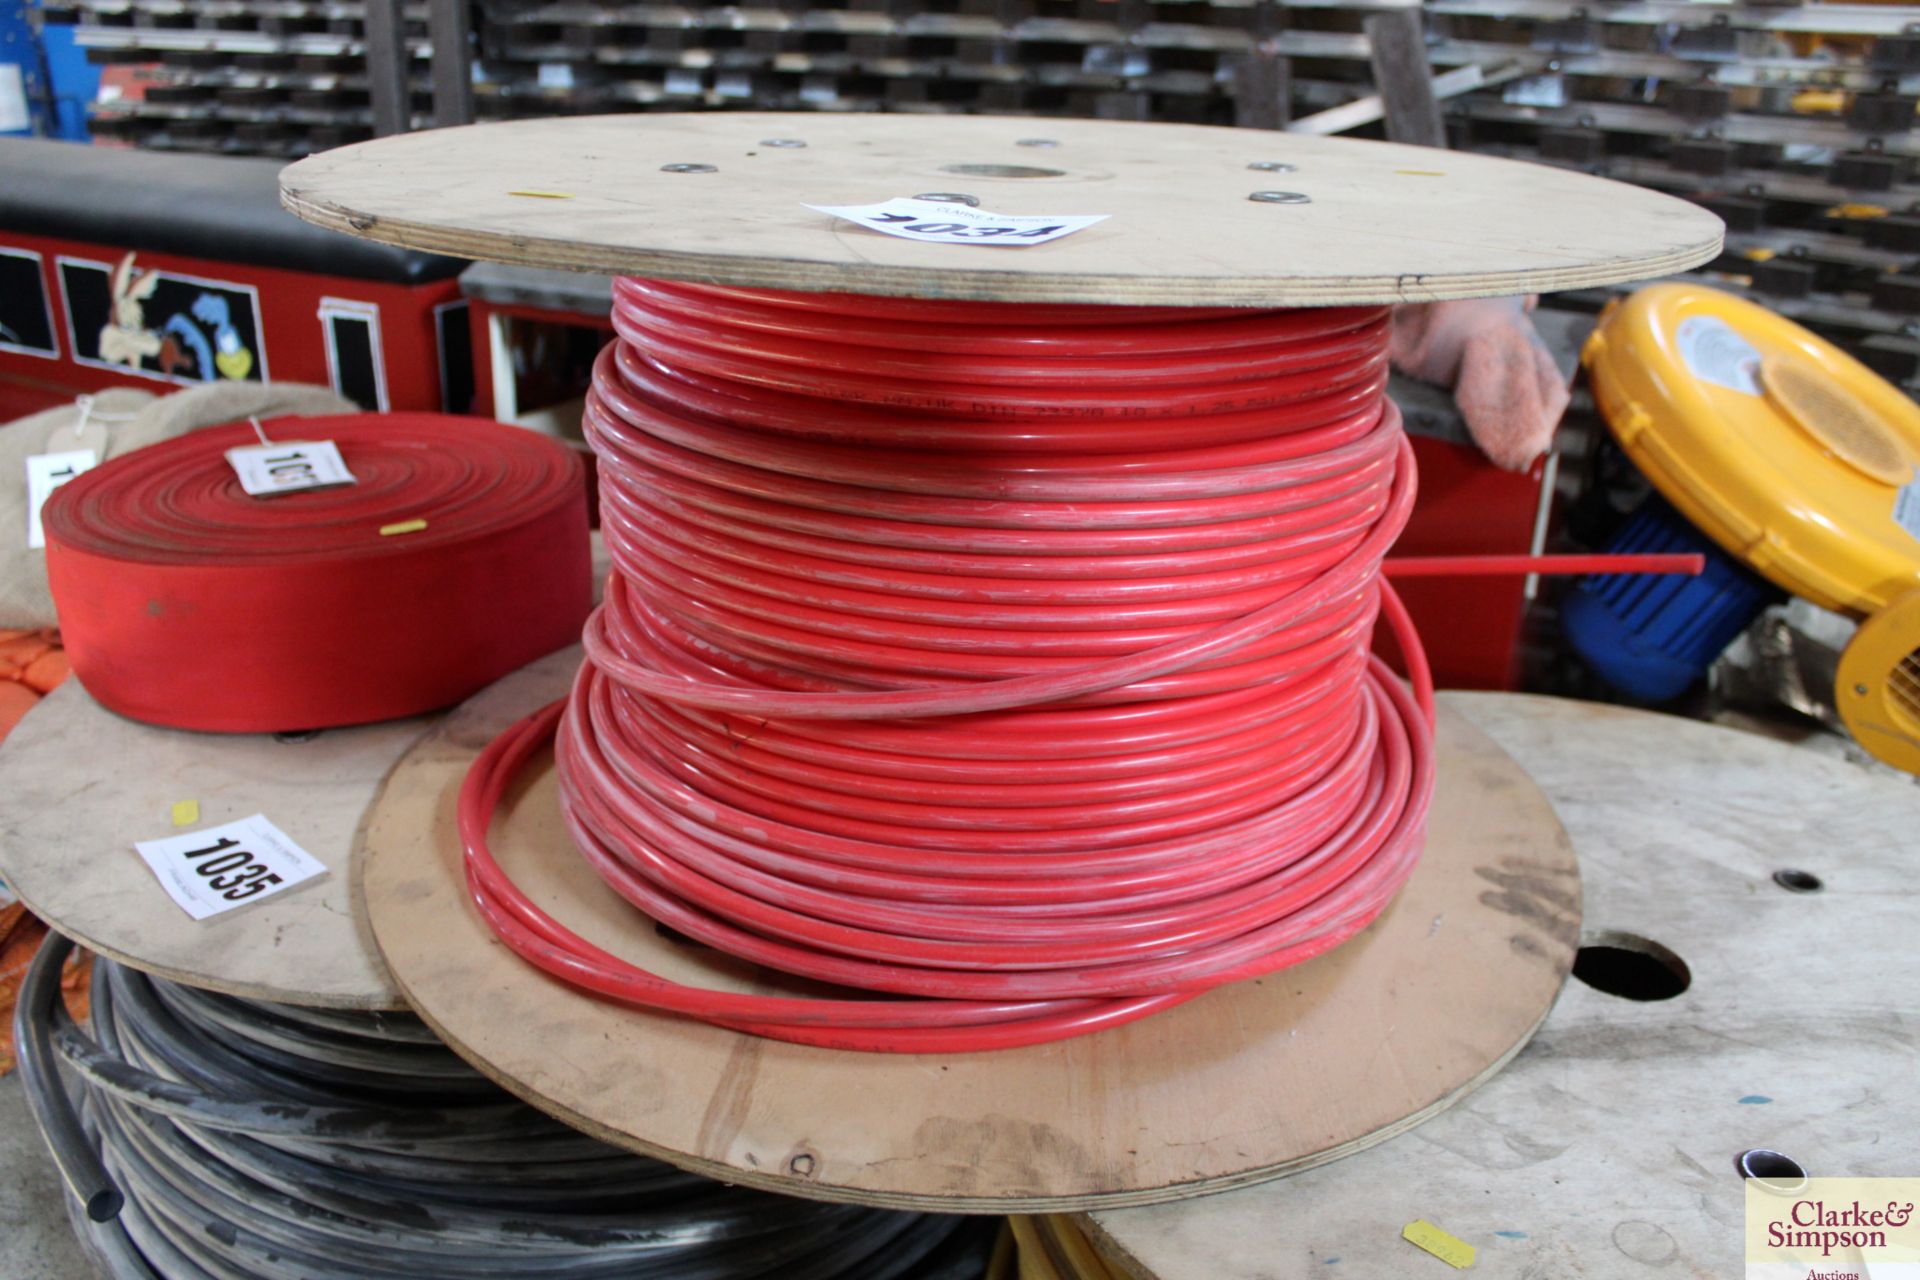 Drum of red trailer airline pipe. V